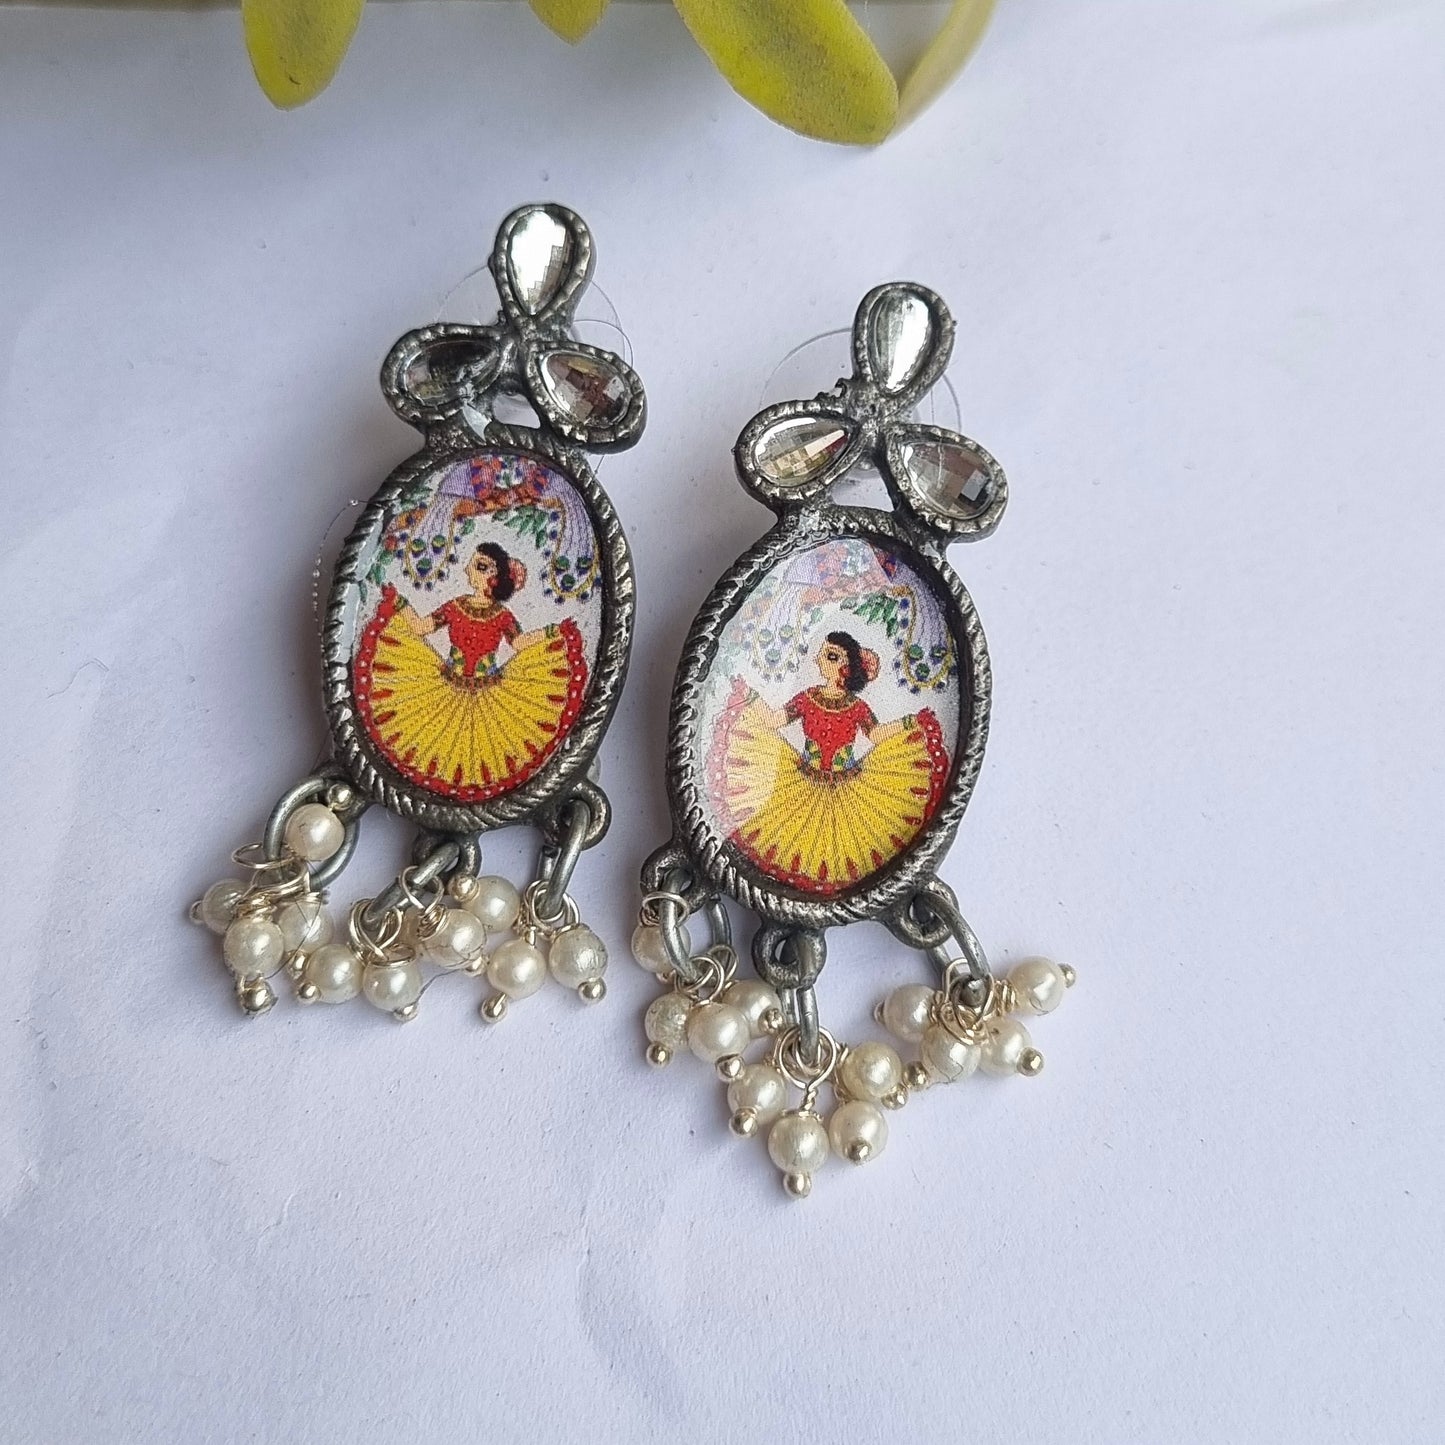 Lady Small Picture earrings